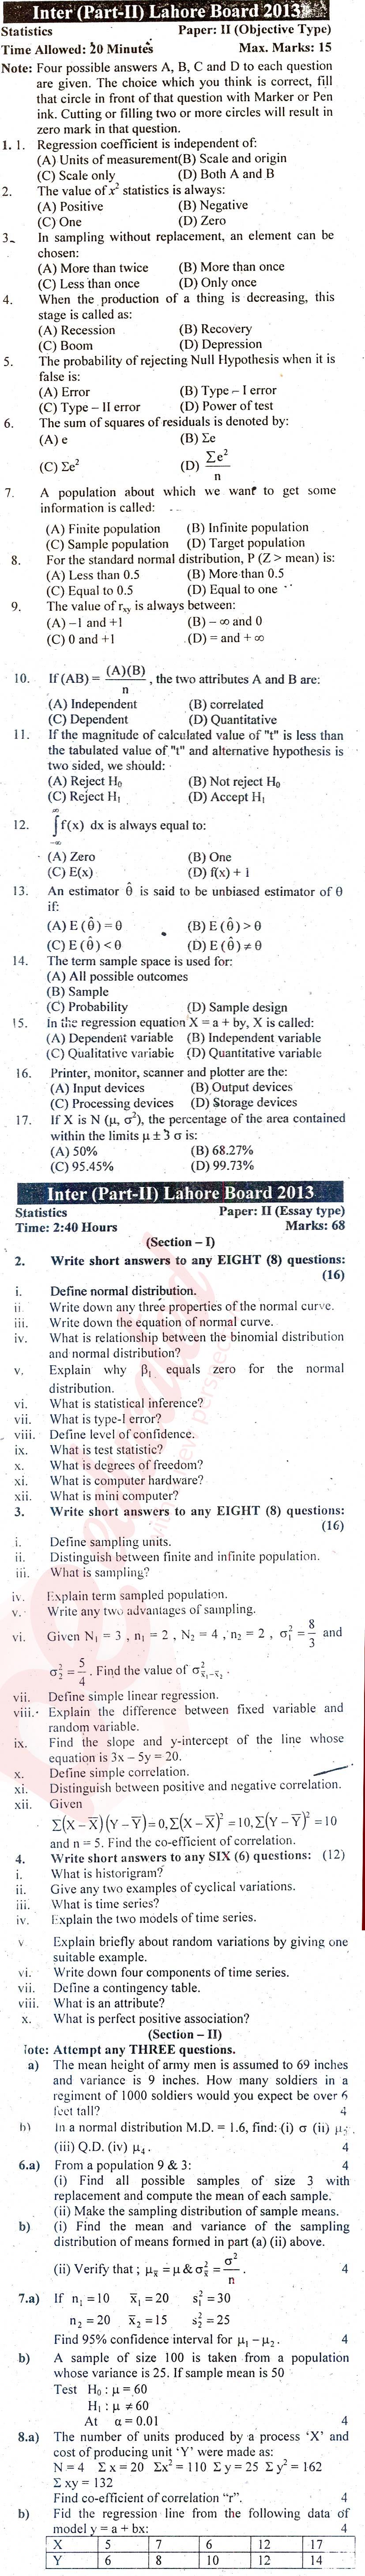 Statistics 12th class Past Paper Group 1 BISE Lahore 2013